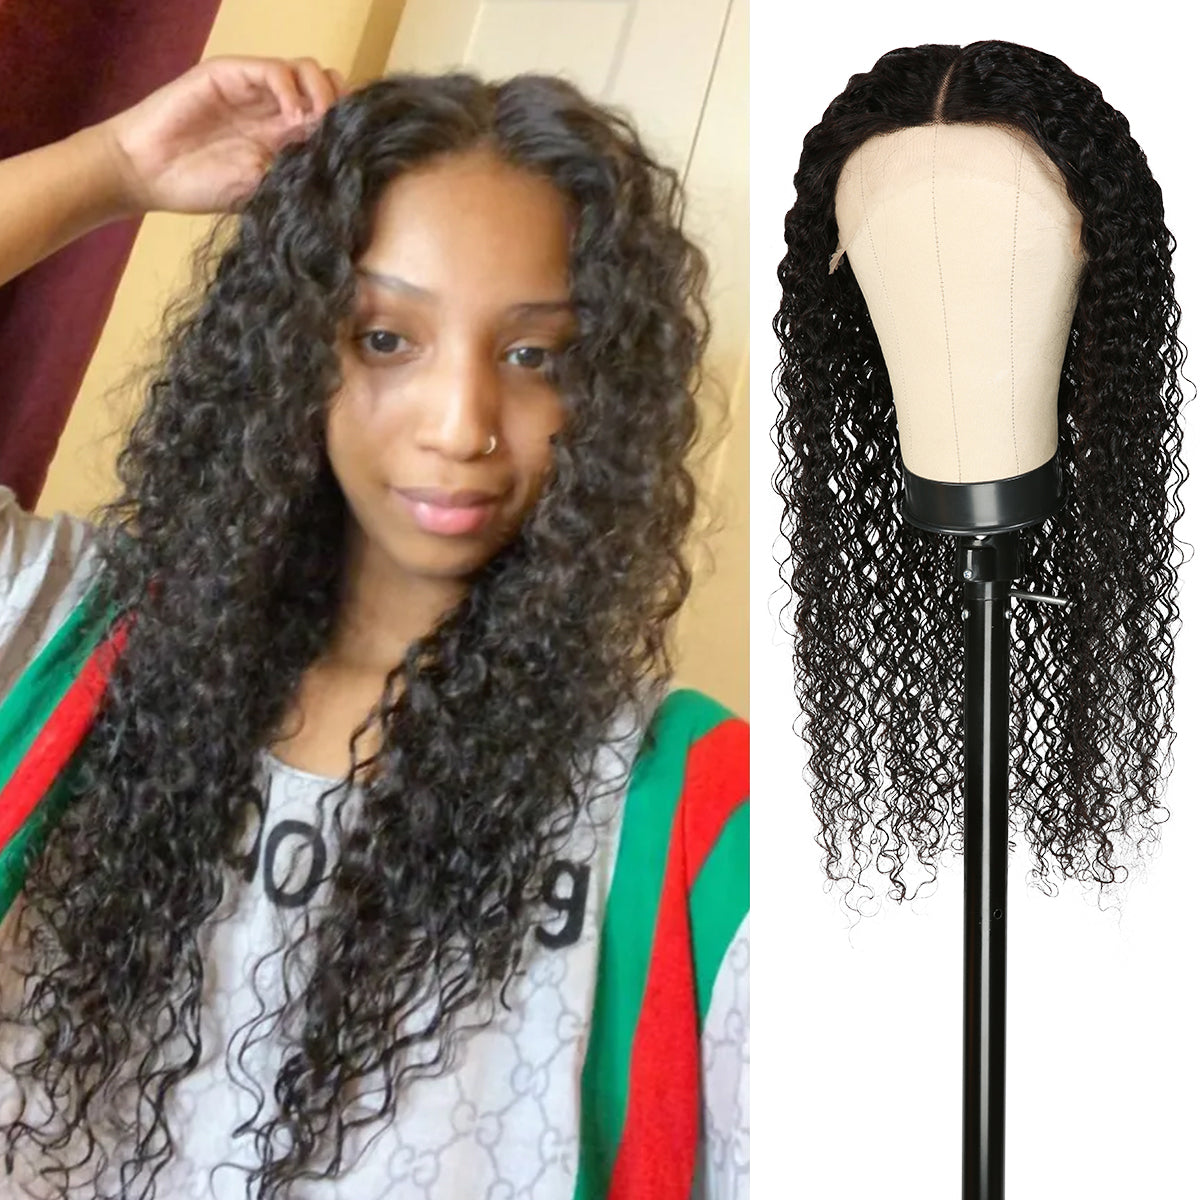 The T Part lace wig is a beginner-friendly wig which is the most affordable wig types, It’s wearable right out the box, so you don’t need to know a lot about wig styling to wear the T part. Pre-plucked Natural Hairline with Center Parting, Best summer vacation wigs, Best curly wig on tiktok, Low maintenance hairstyle